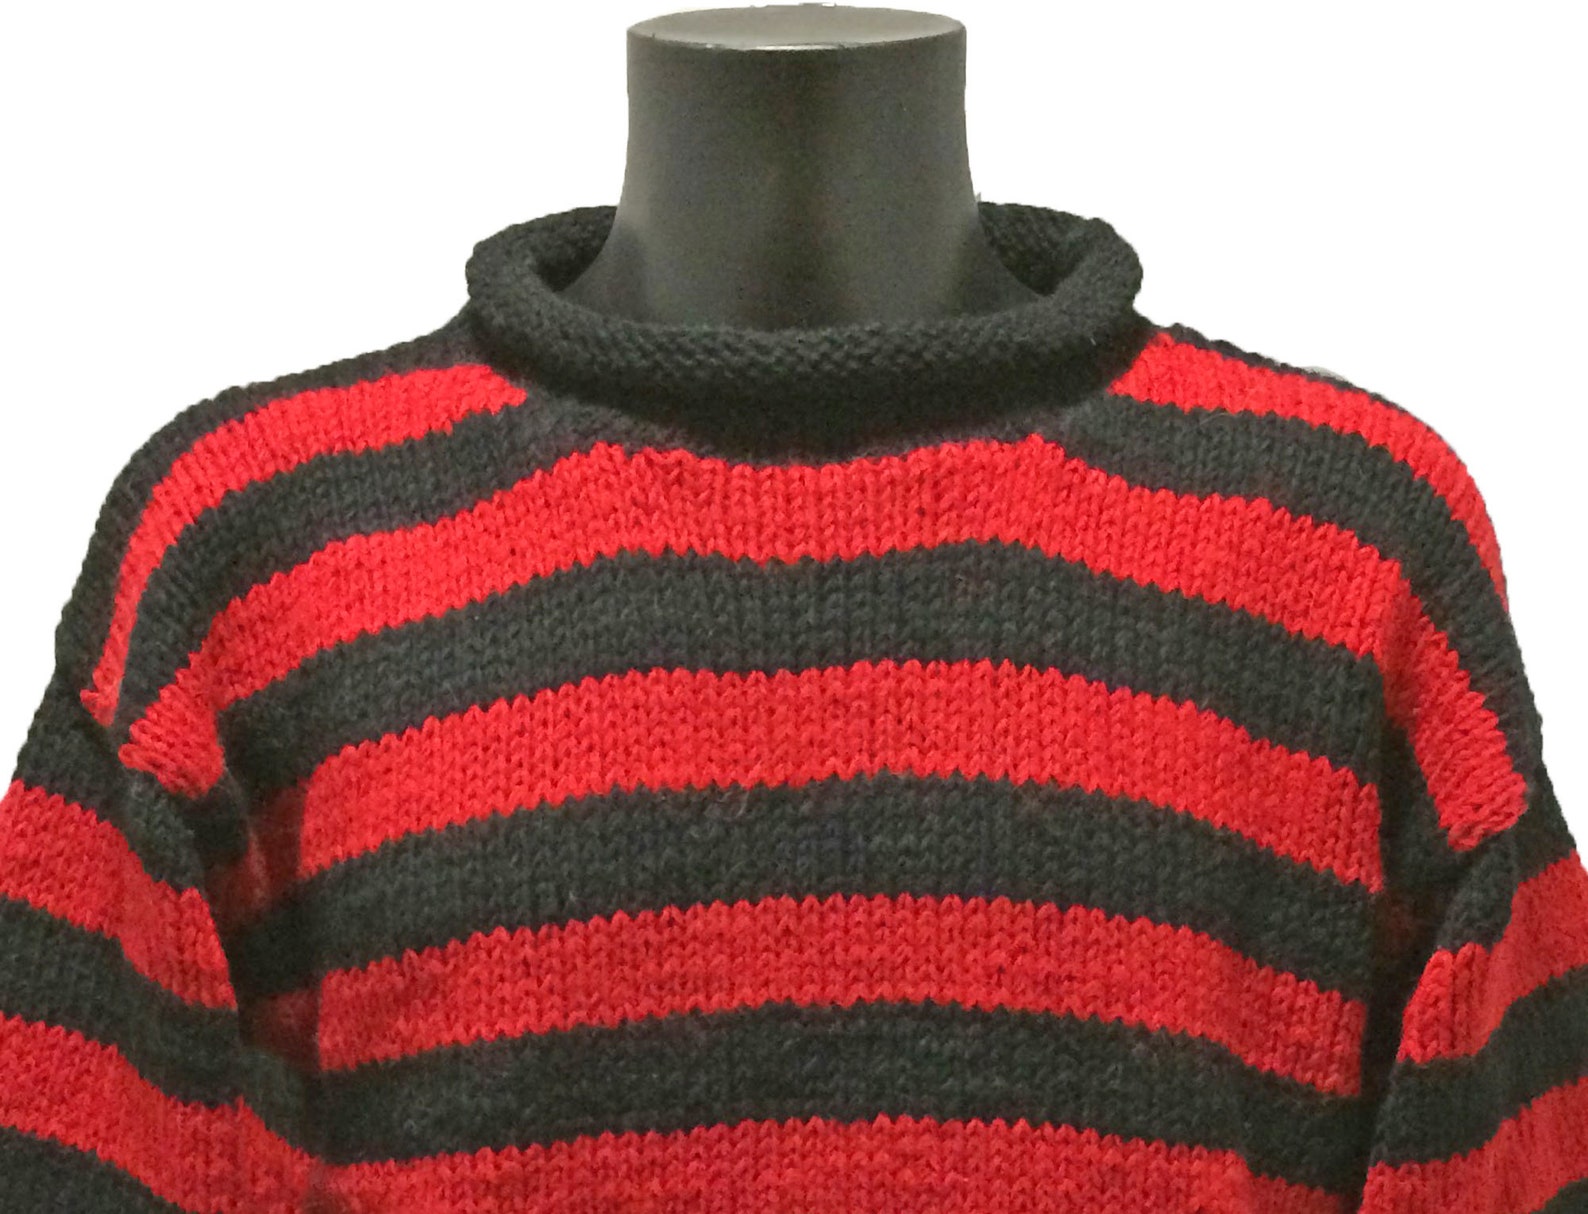 Quality Handmade Unisex Black Red Stripe Quality Knitted Pullover ...